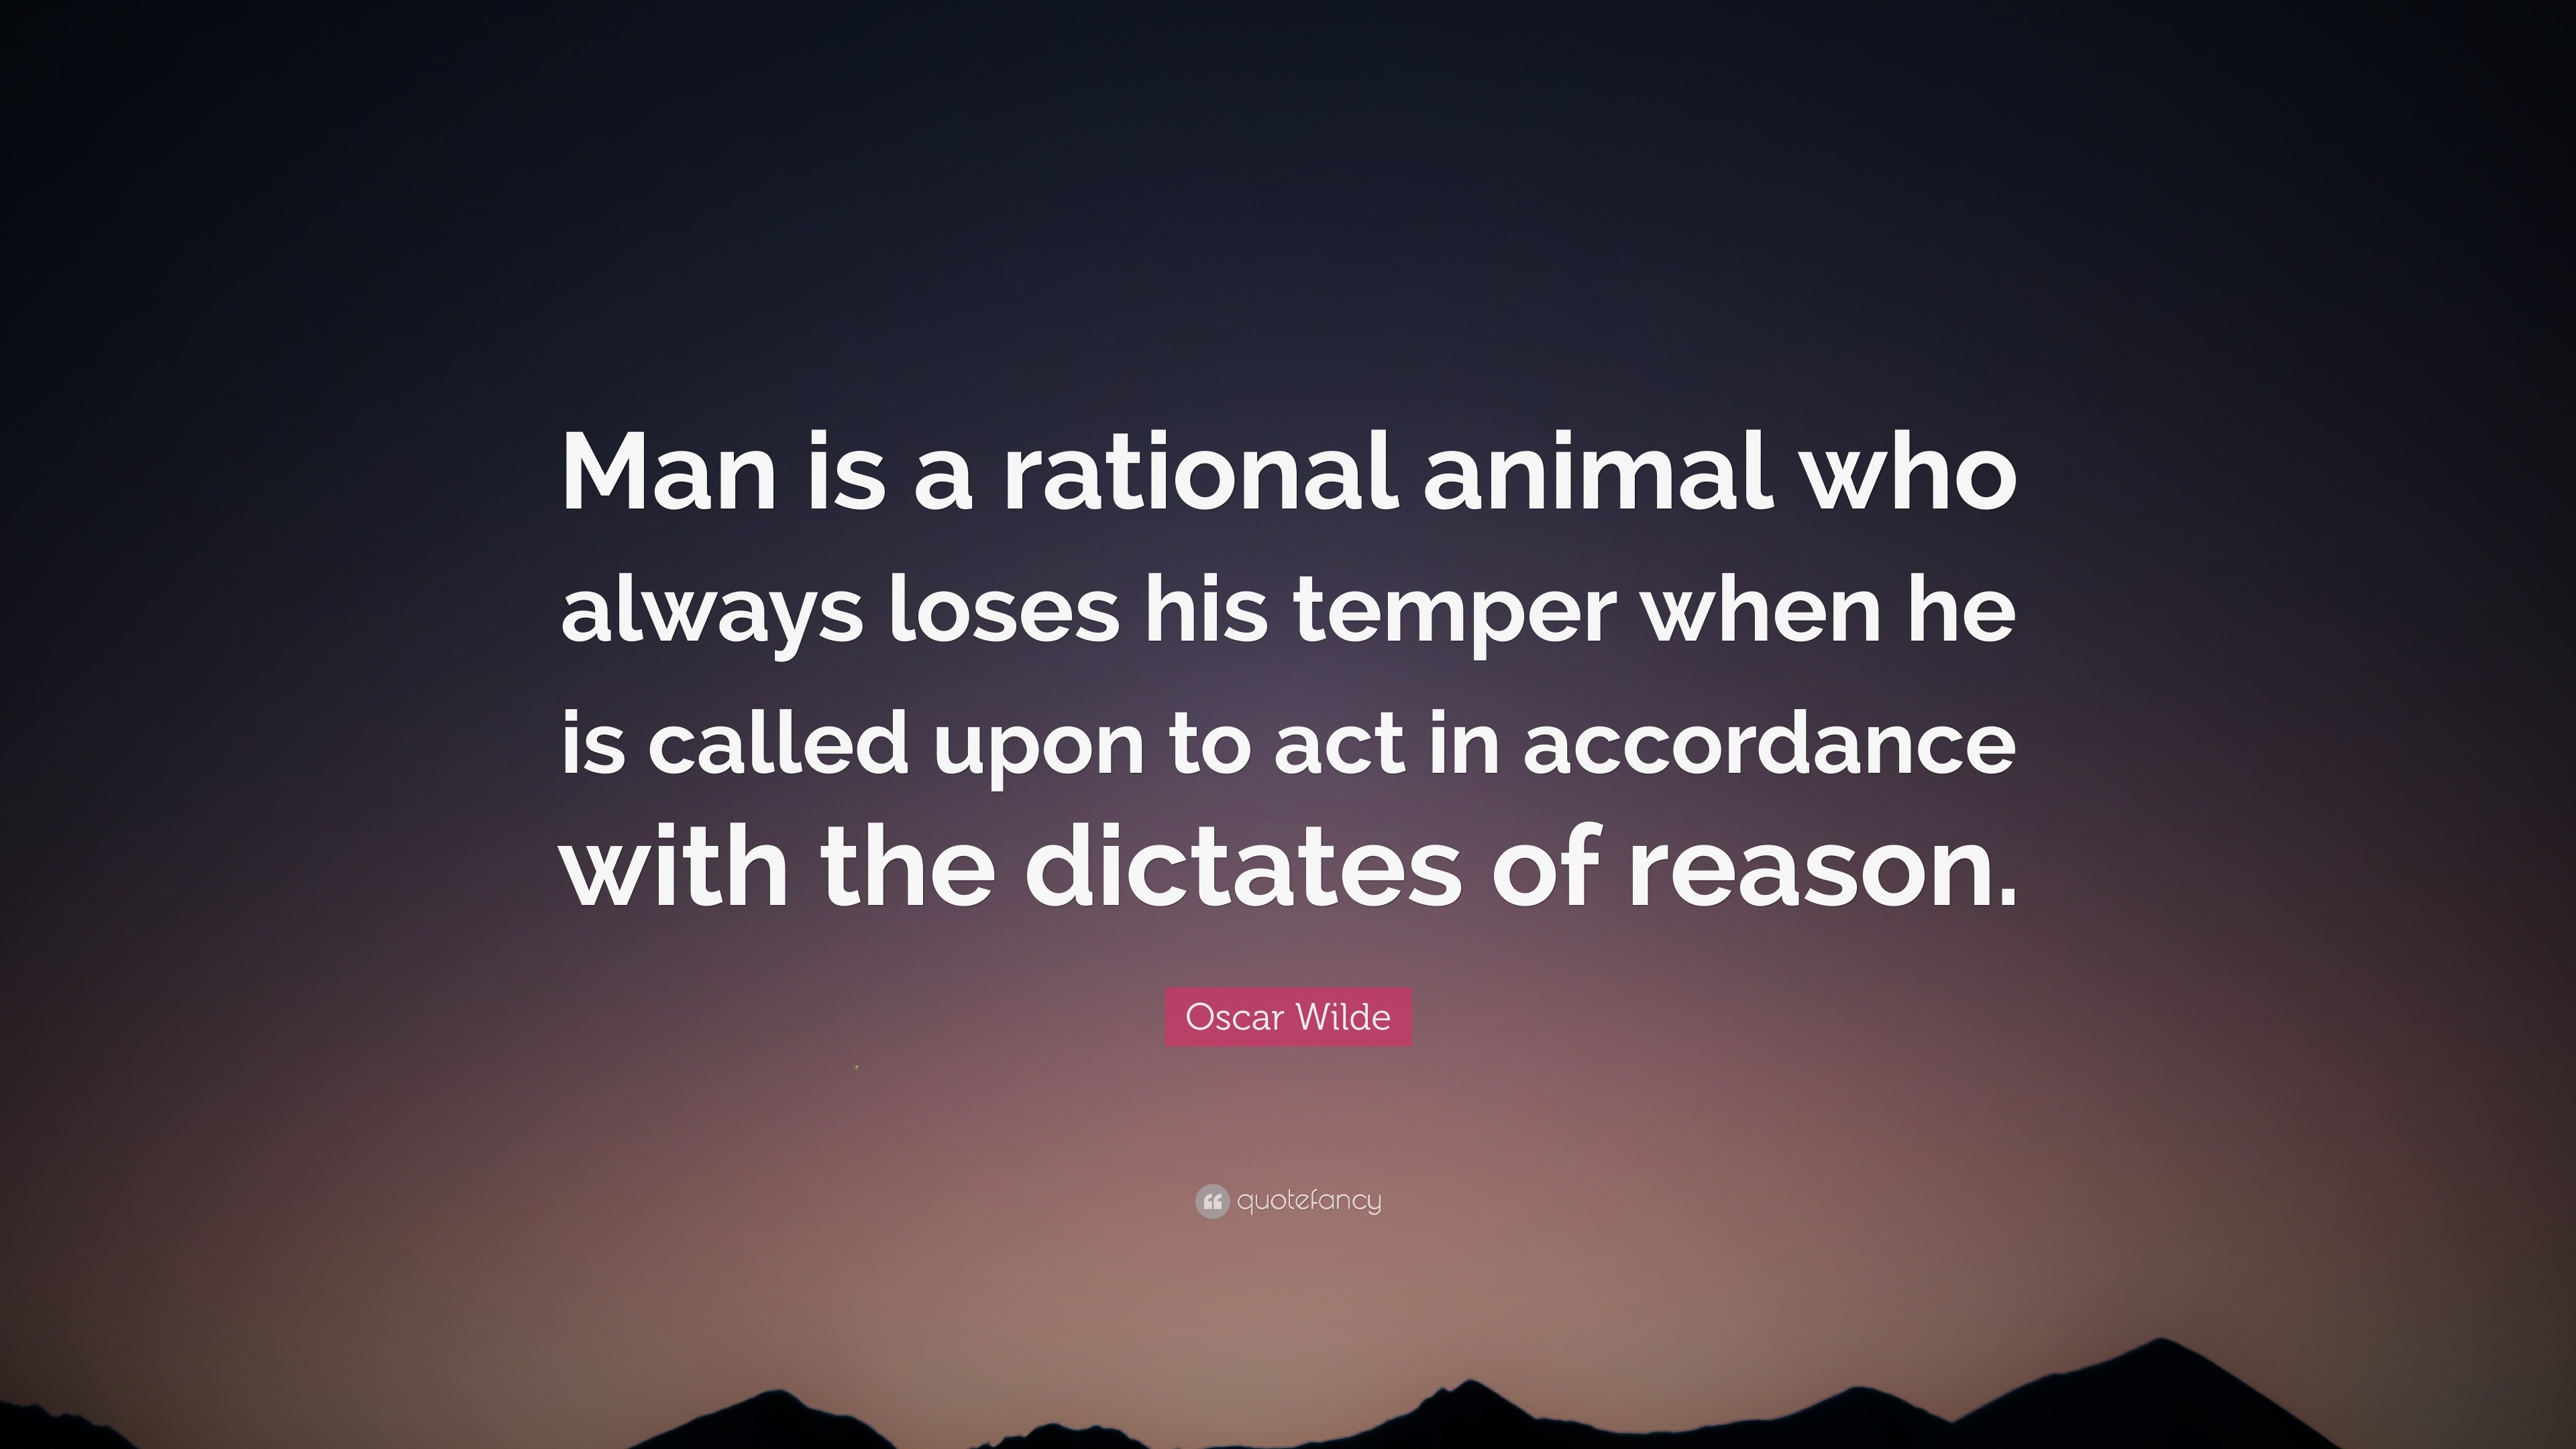 Oscar Wilde Quote: “Man is a rational animal who always loses his temper  when he is called upon to act in accordance with the dictates of re...”